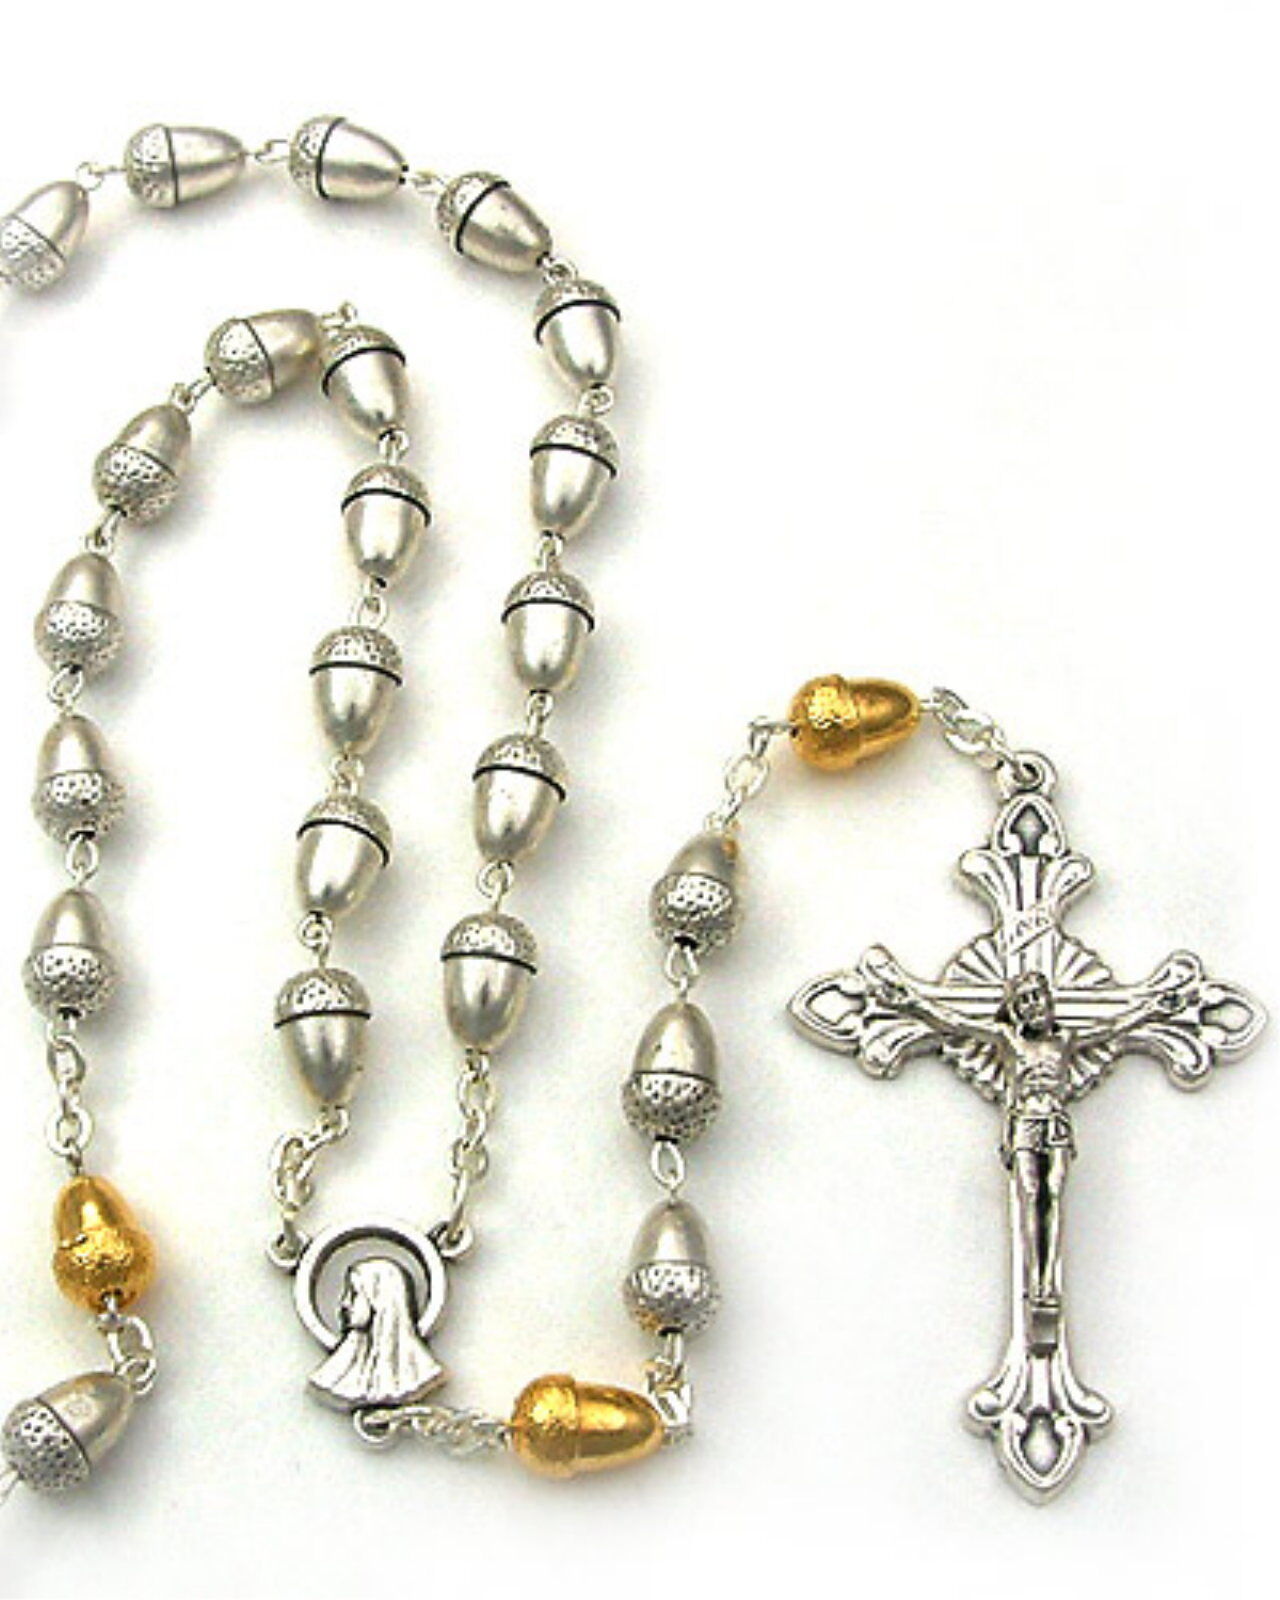 NEW BEAUTIFUL MADE IN  ITALY SILVER & GOLD ACORN BEAD ROSARY LOVELY & UNIQUE